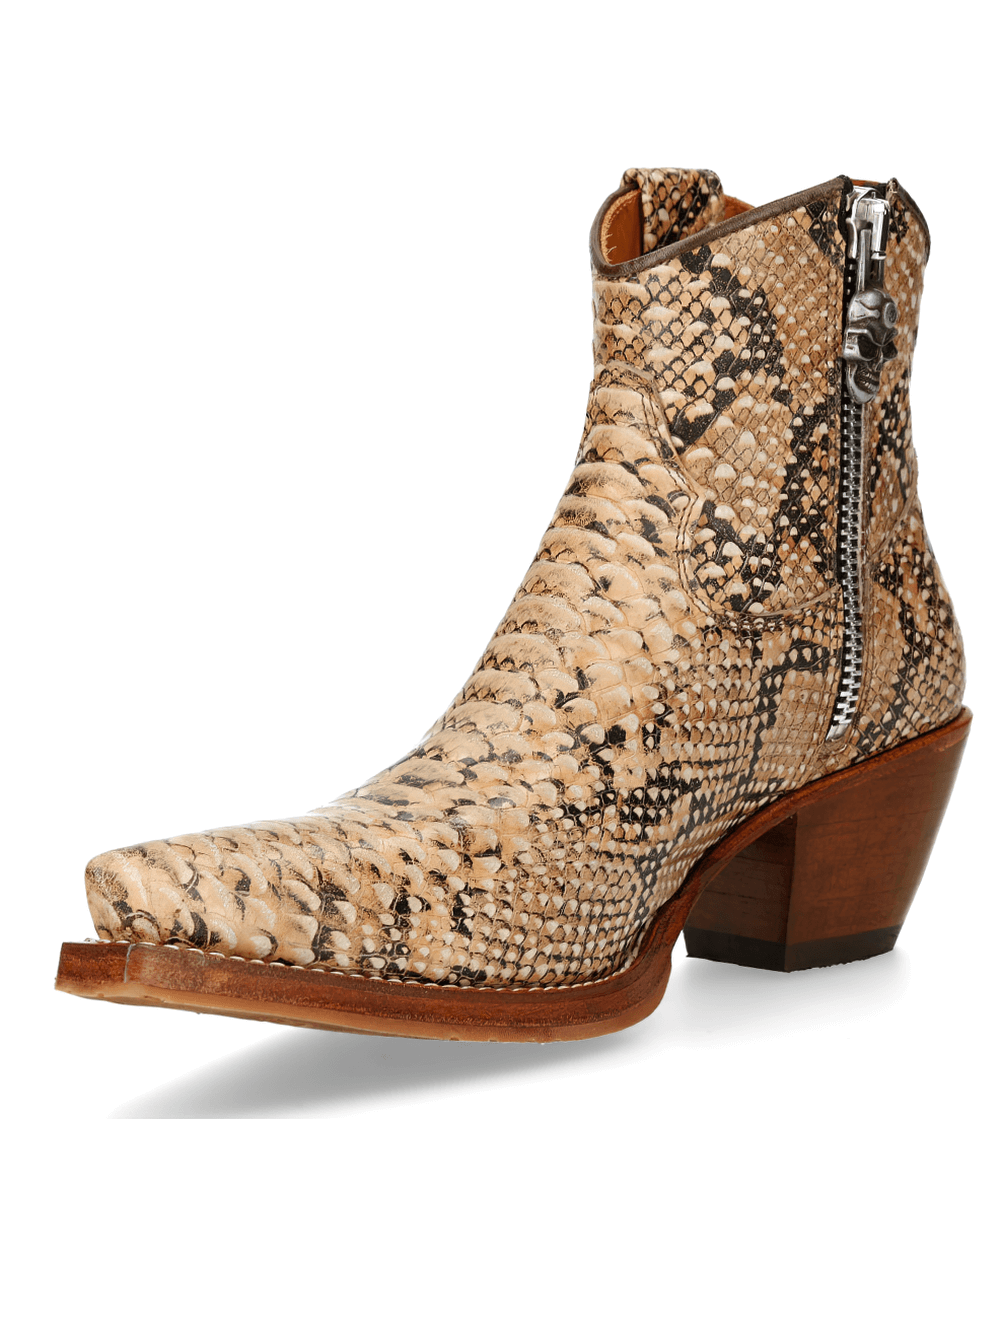 NEW ROCK Snakeskin Ankle Boots with Side Zipper